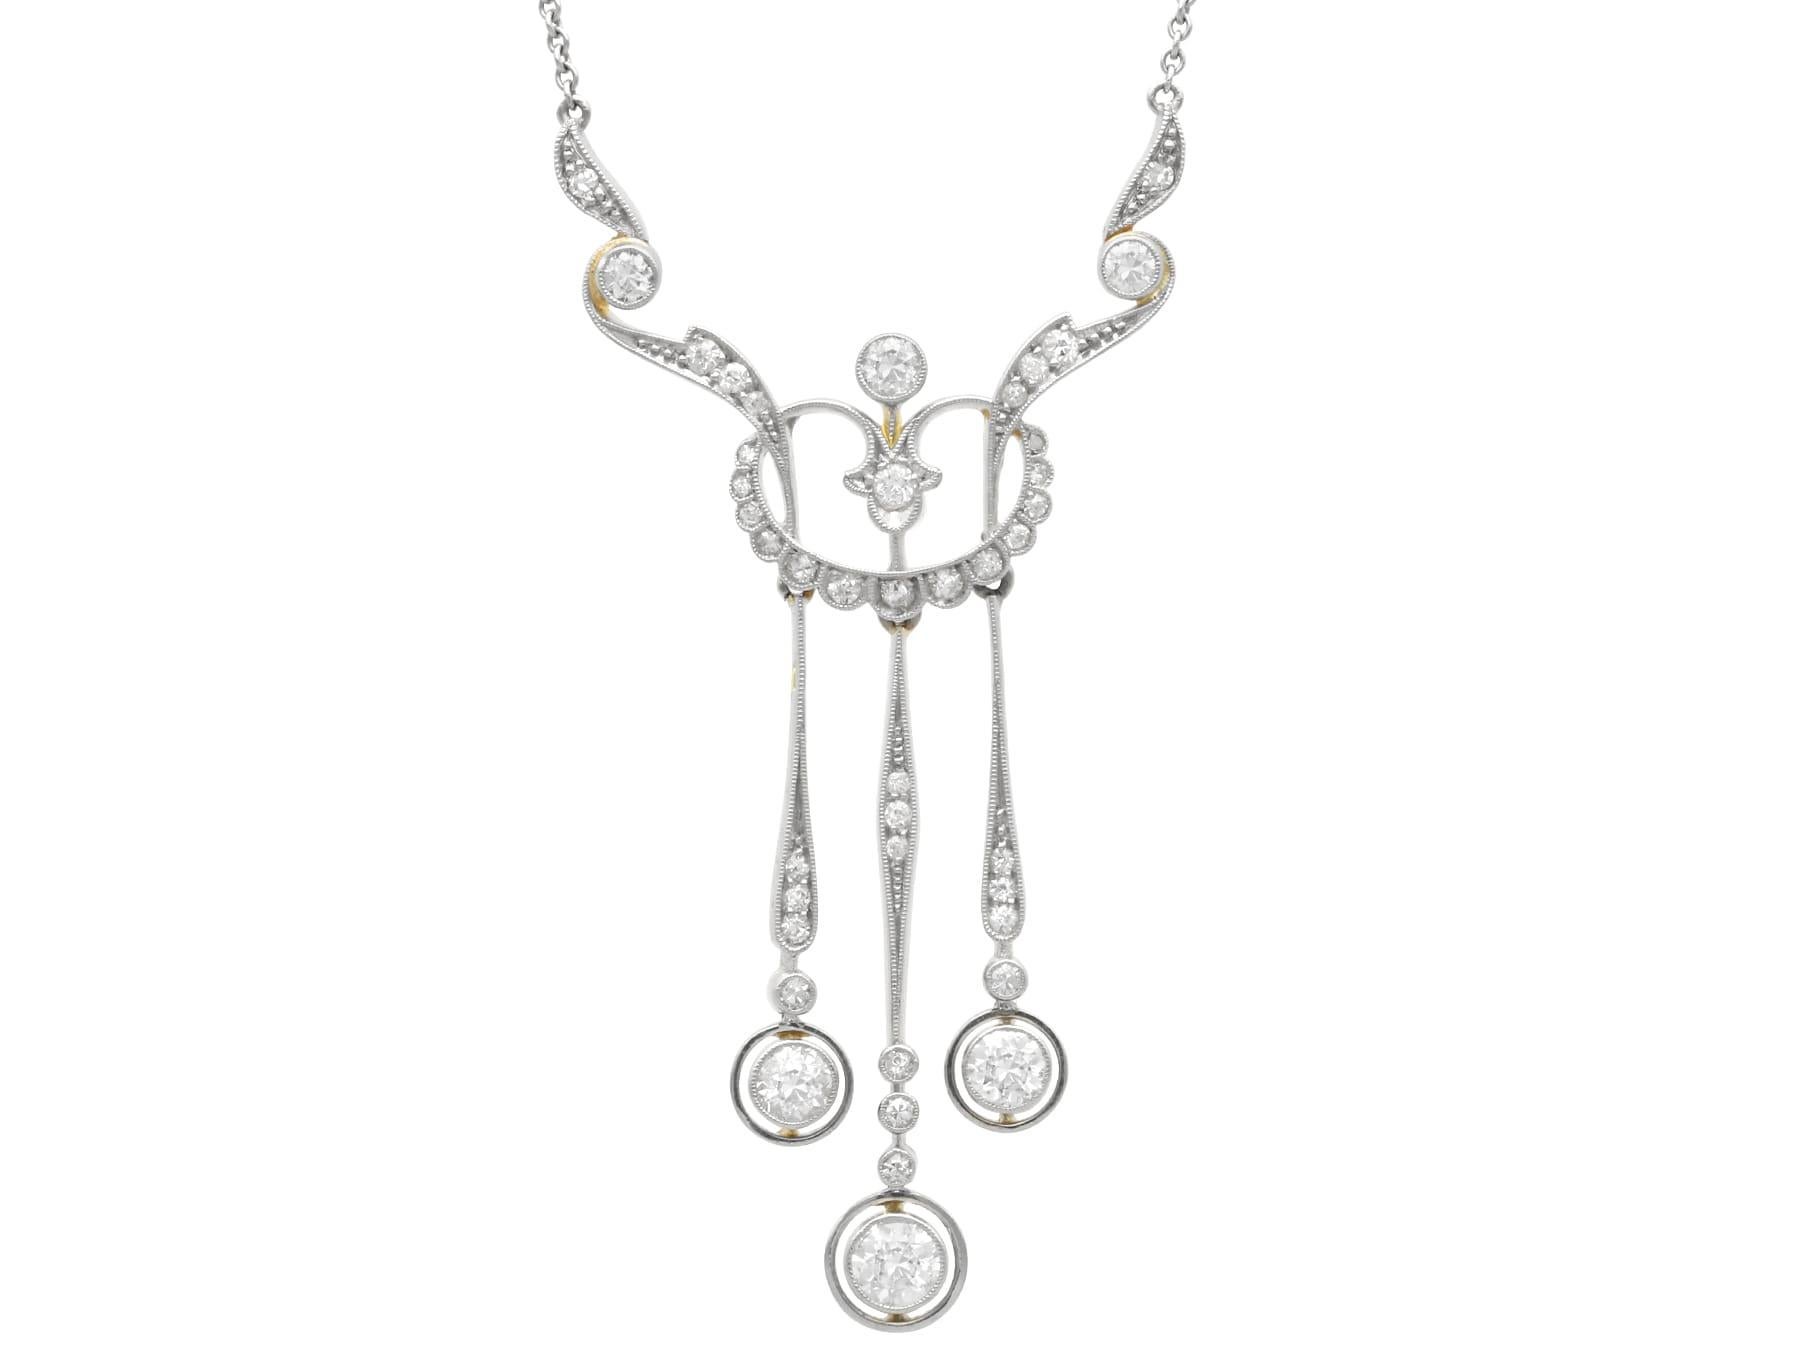 A stunning antique 1.71 carat diamond and 18 carat yellow gold, platinum set pendant; part of our diverse antique jewellery and estate jewelry collections

This stunning, fine and impressive antique 1920's diamond drop necklace has been crafted in